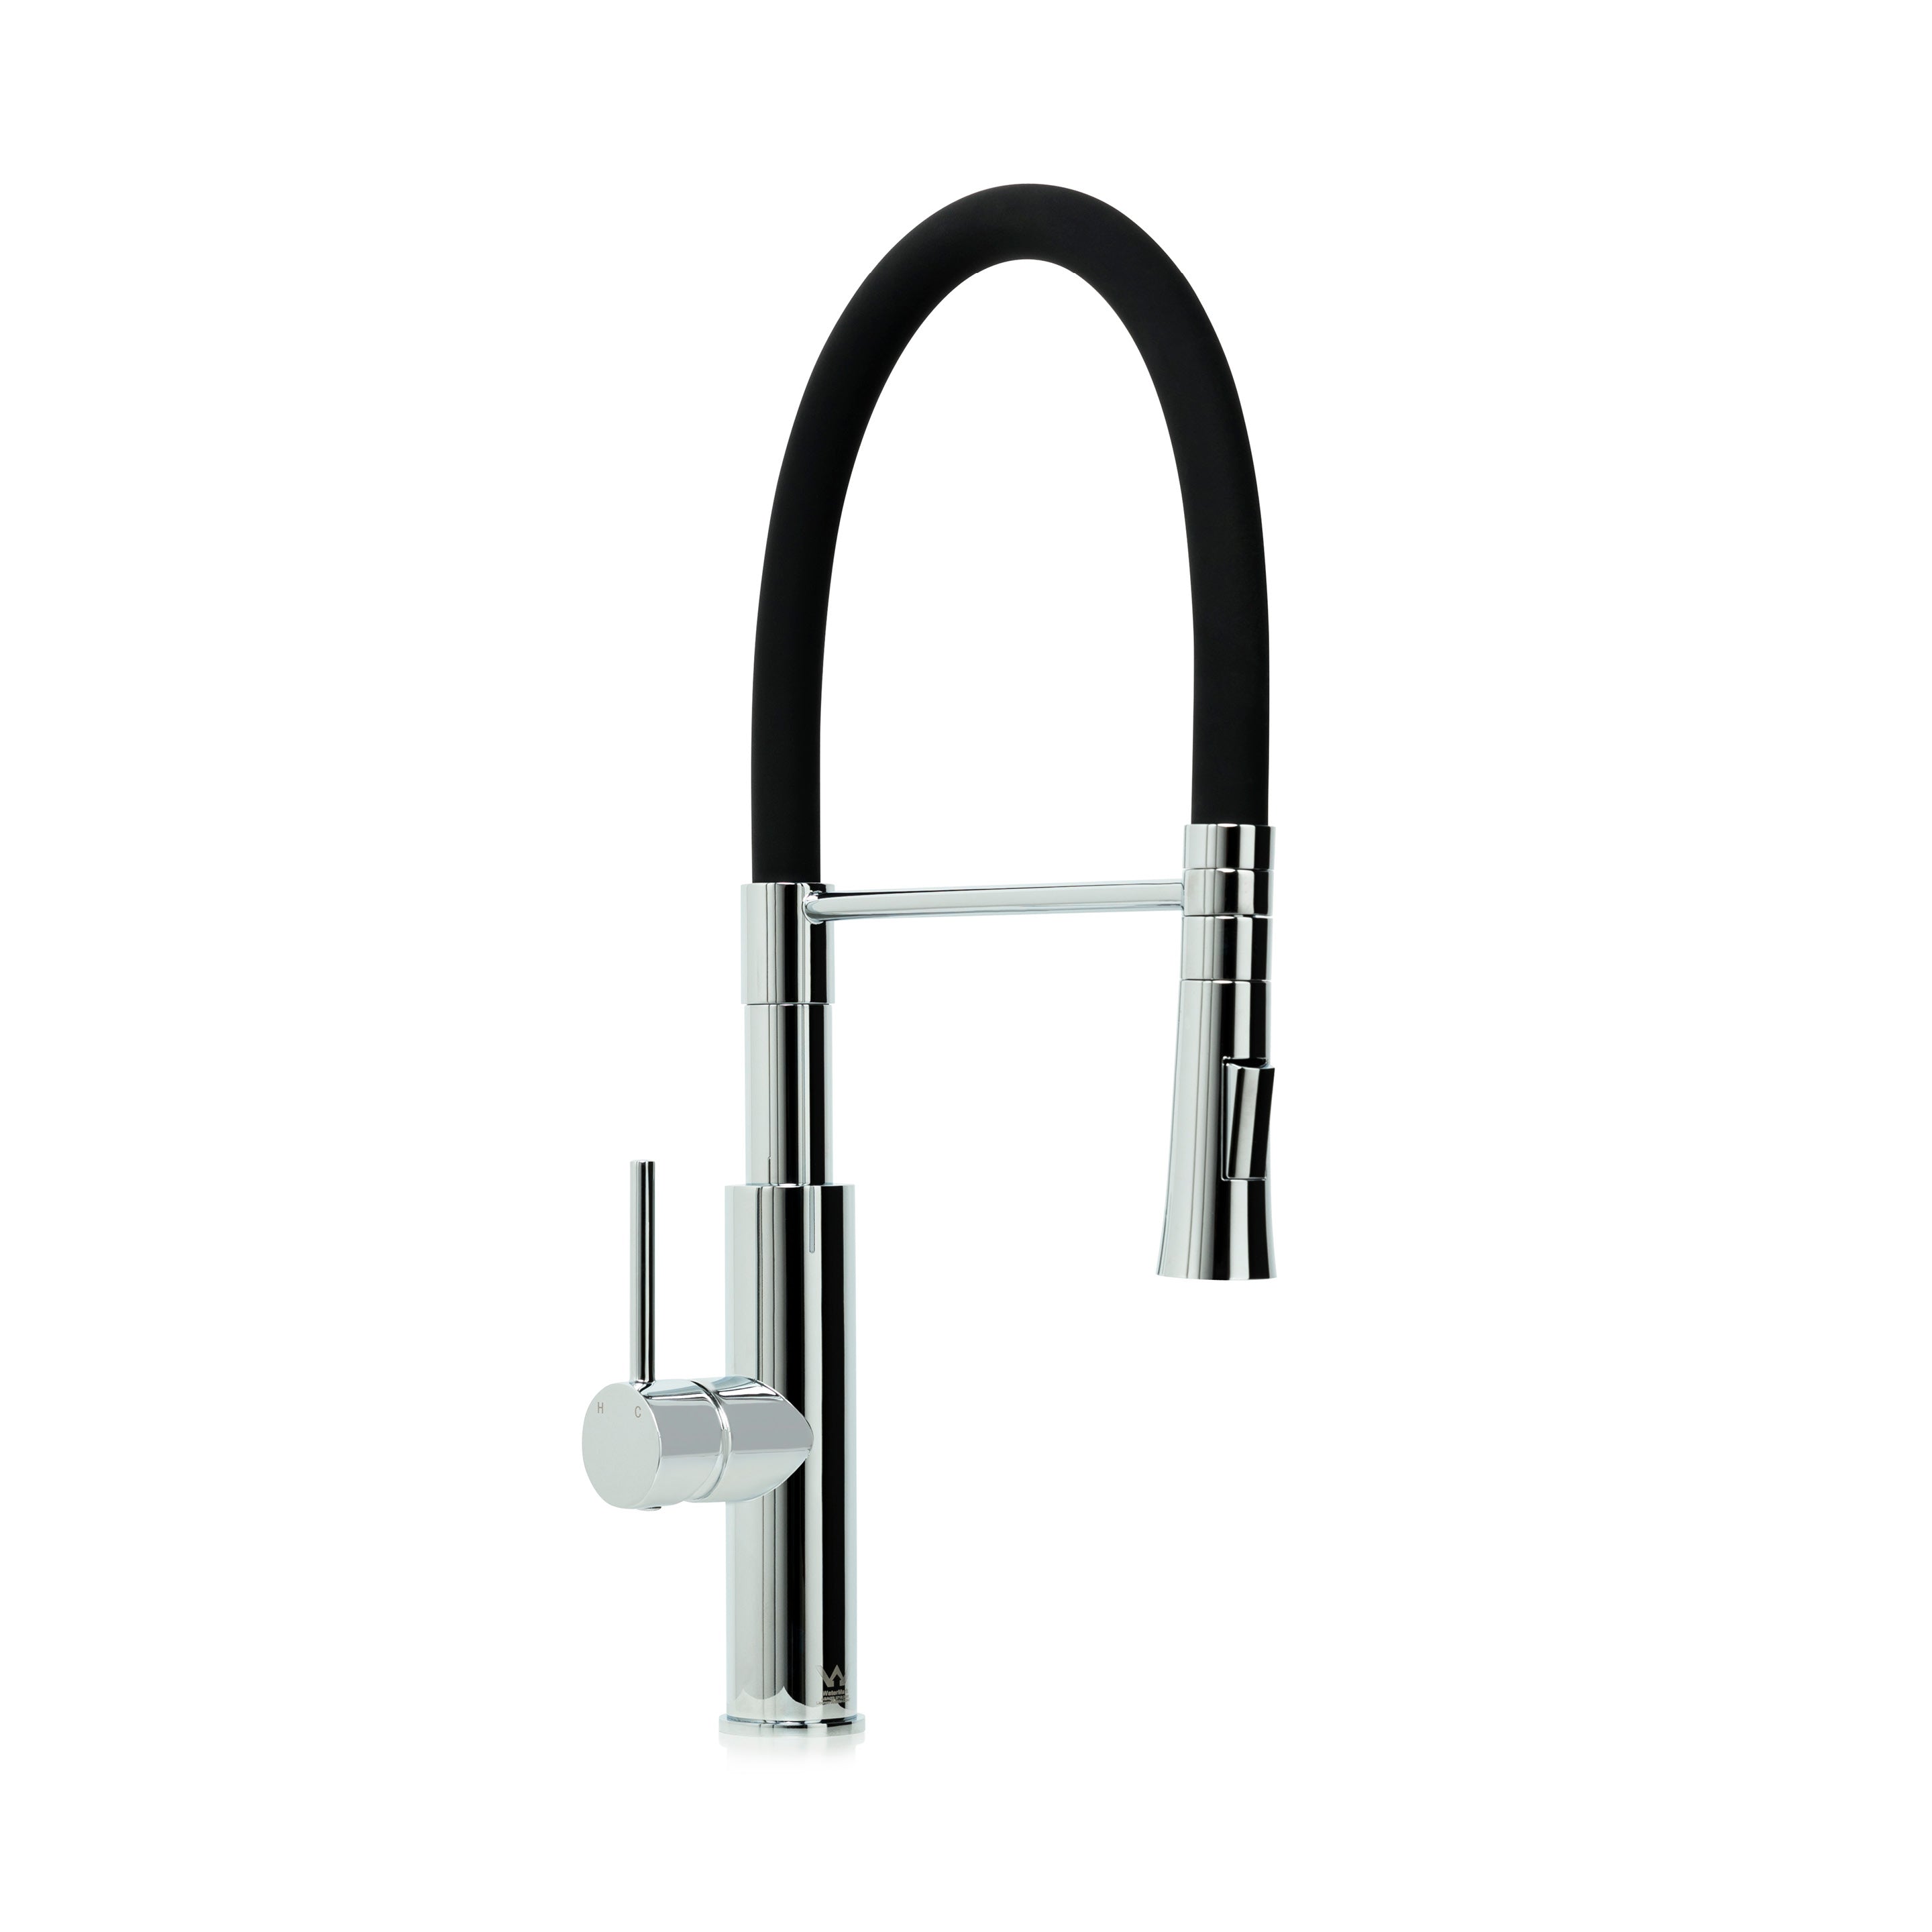 The Cove Kitchen Mixer in Black